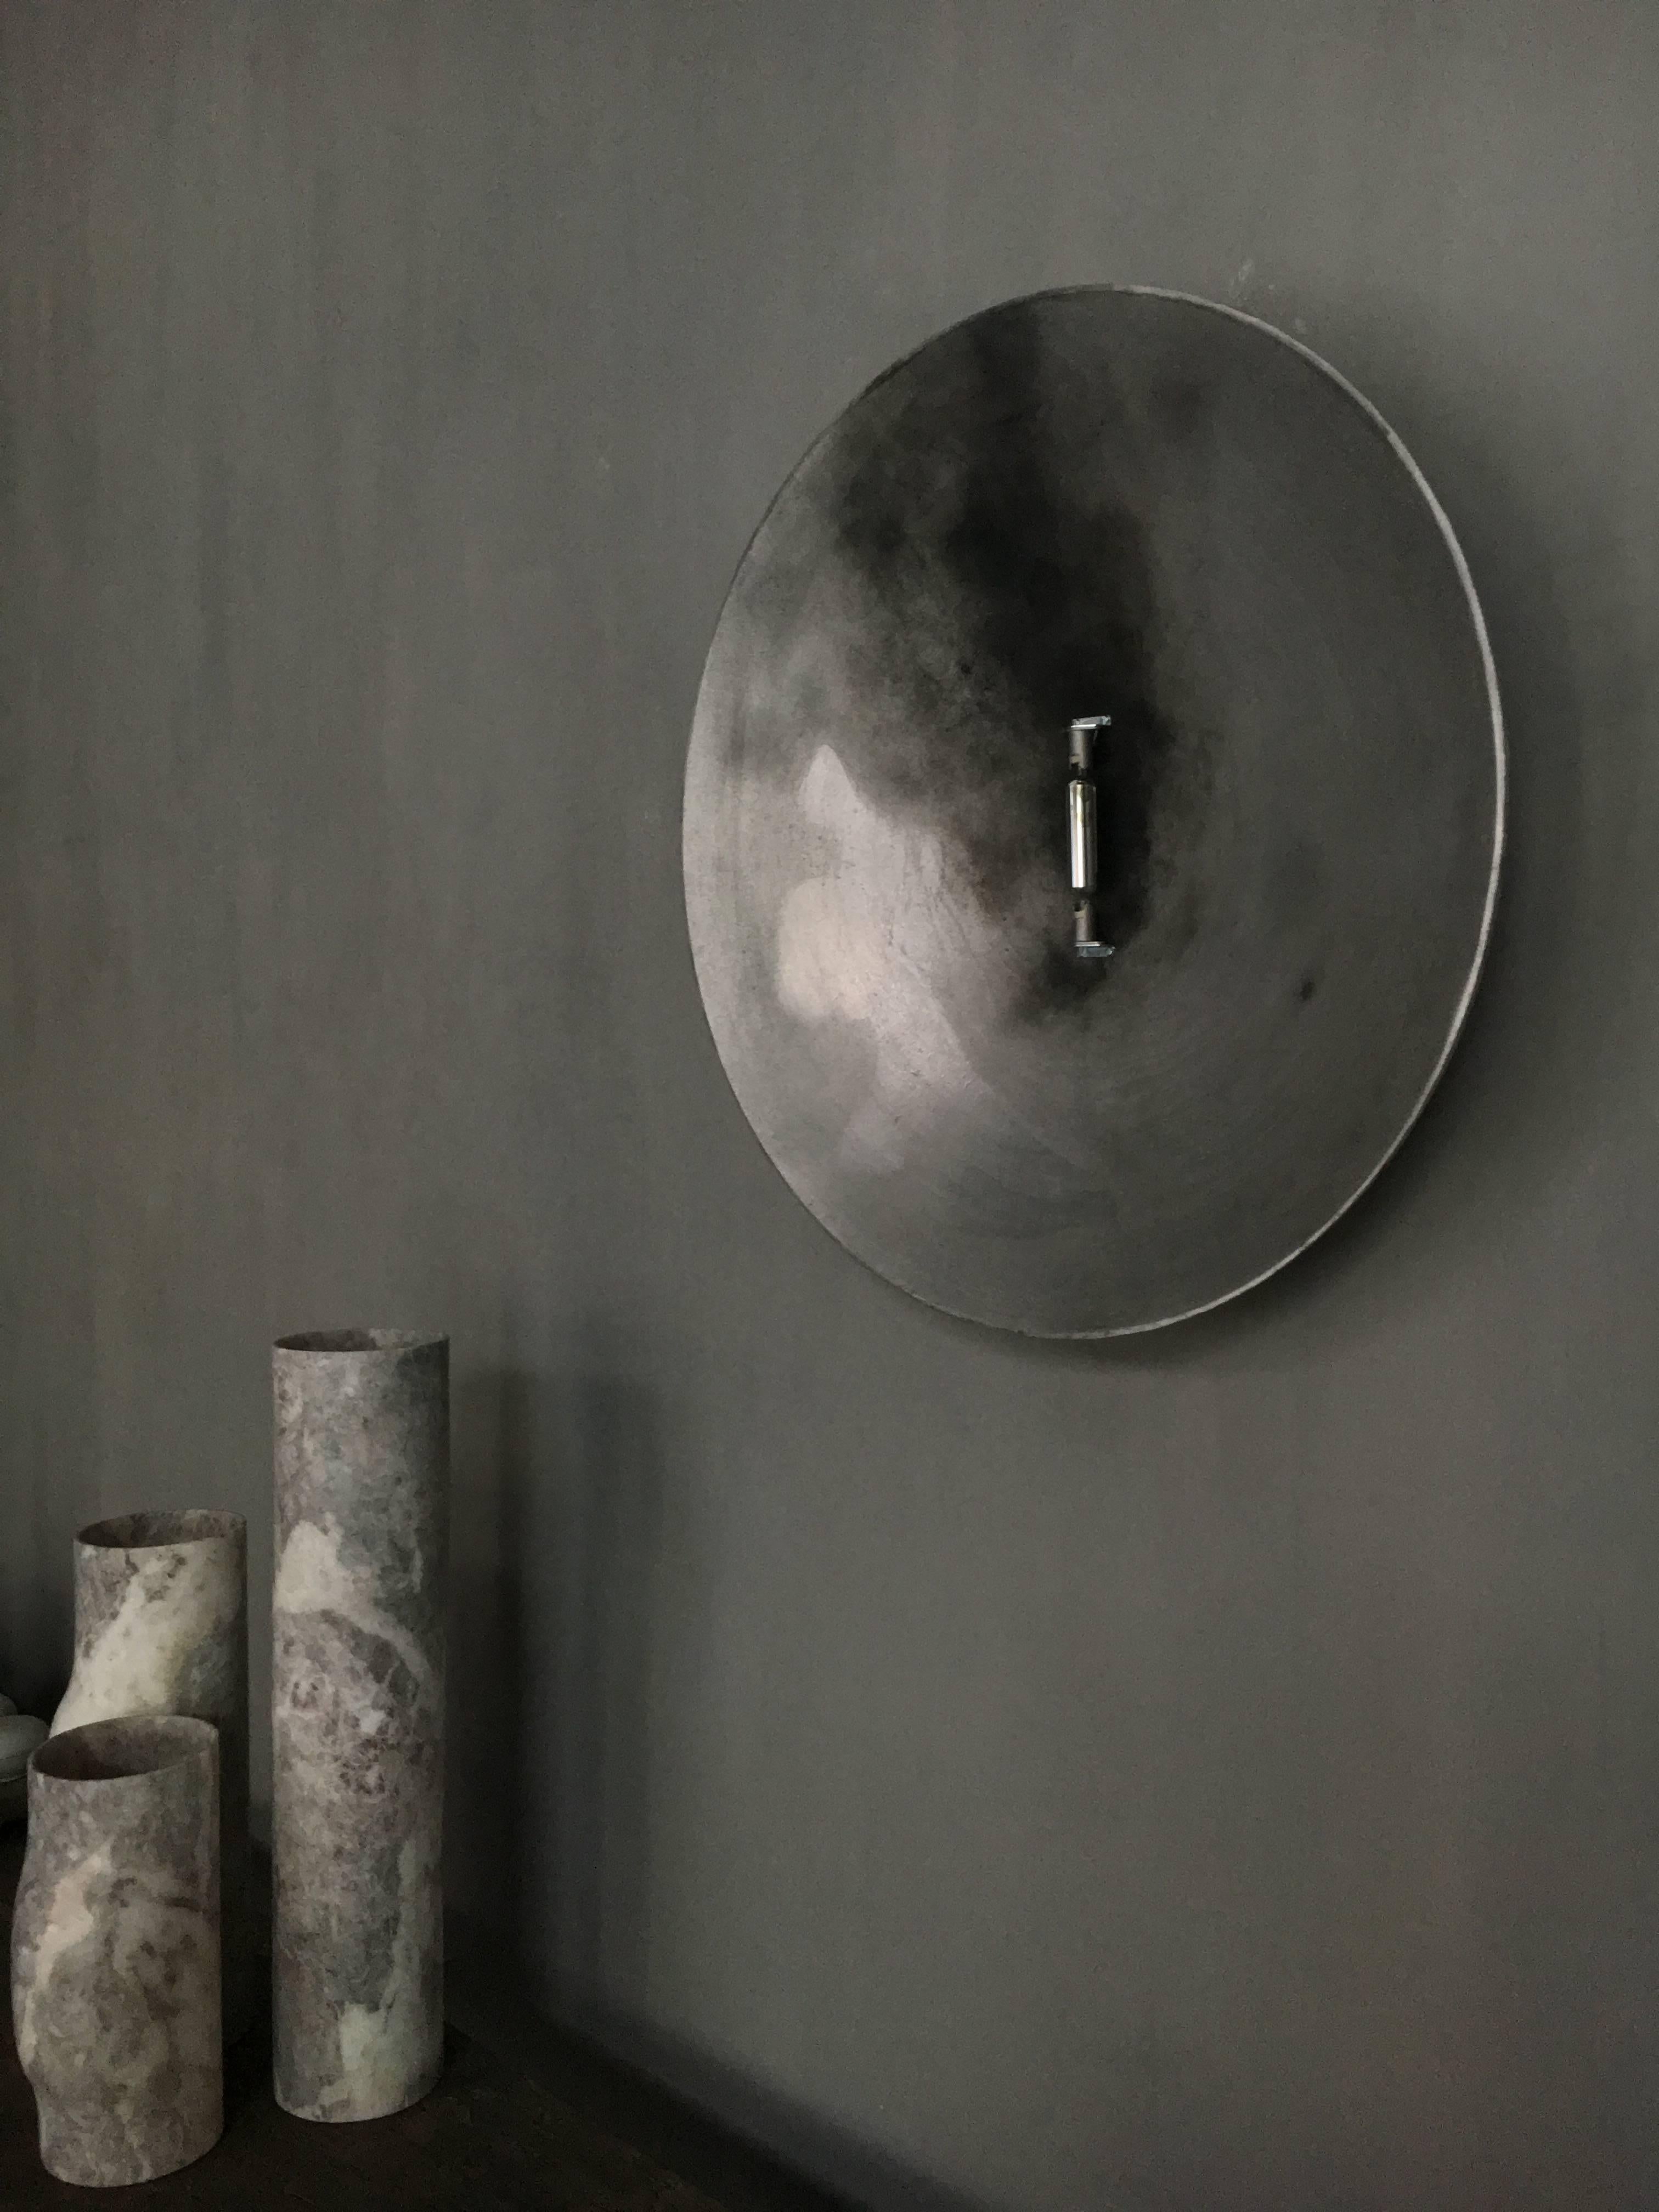 'Circuit' wall light by Danish designer Kevin Josias. The lamp is made of sandcast aluminium with black patina treatment. Limited edition of 30 pieces. All pieces made with unique treatments.
Fitted with LED component (230V).